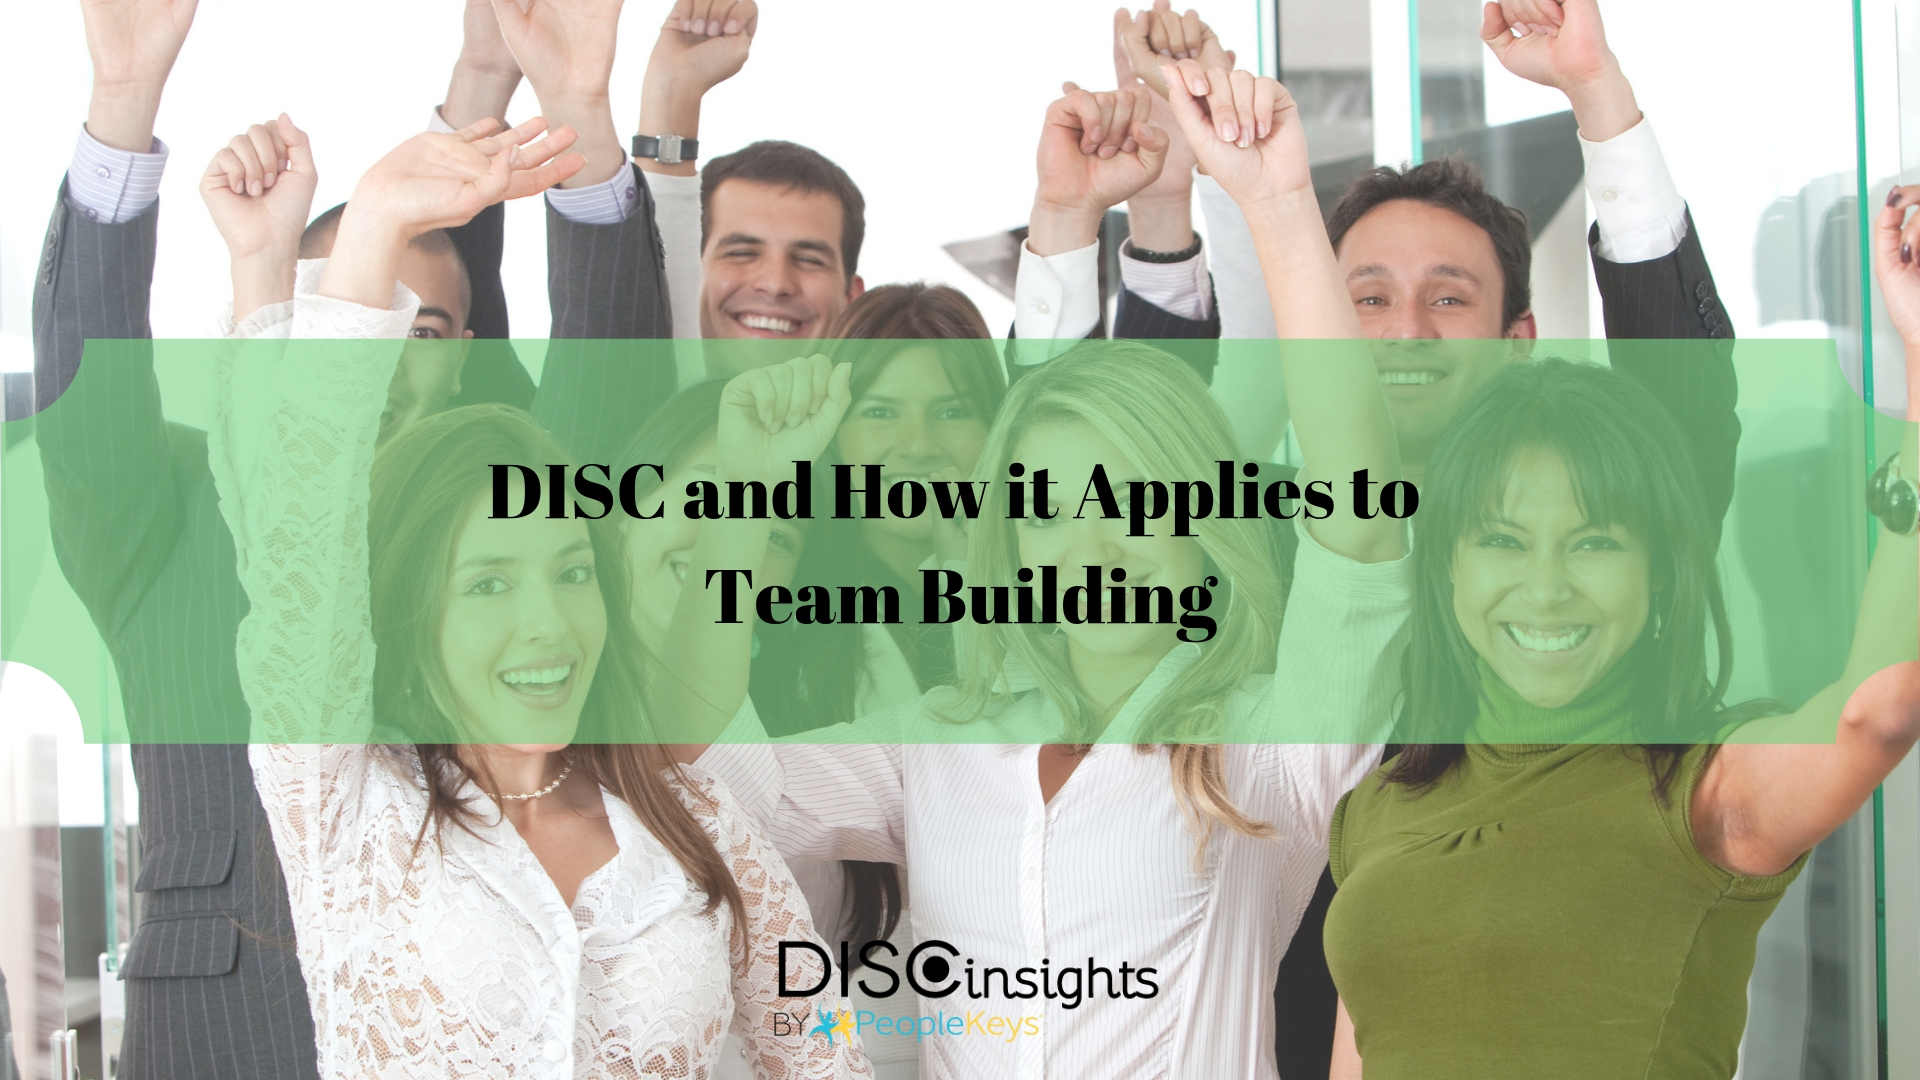 DISC and How it Applies to Team Building